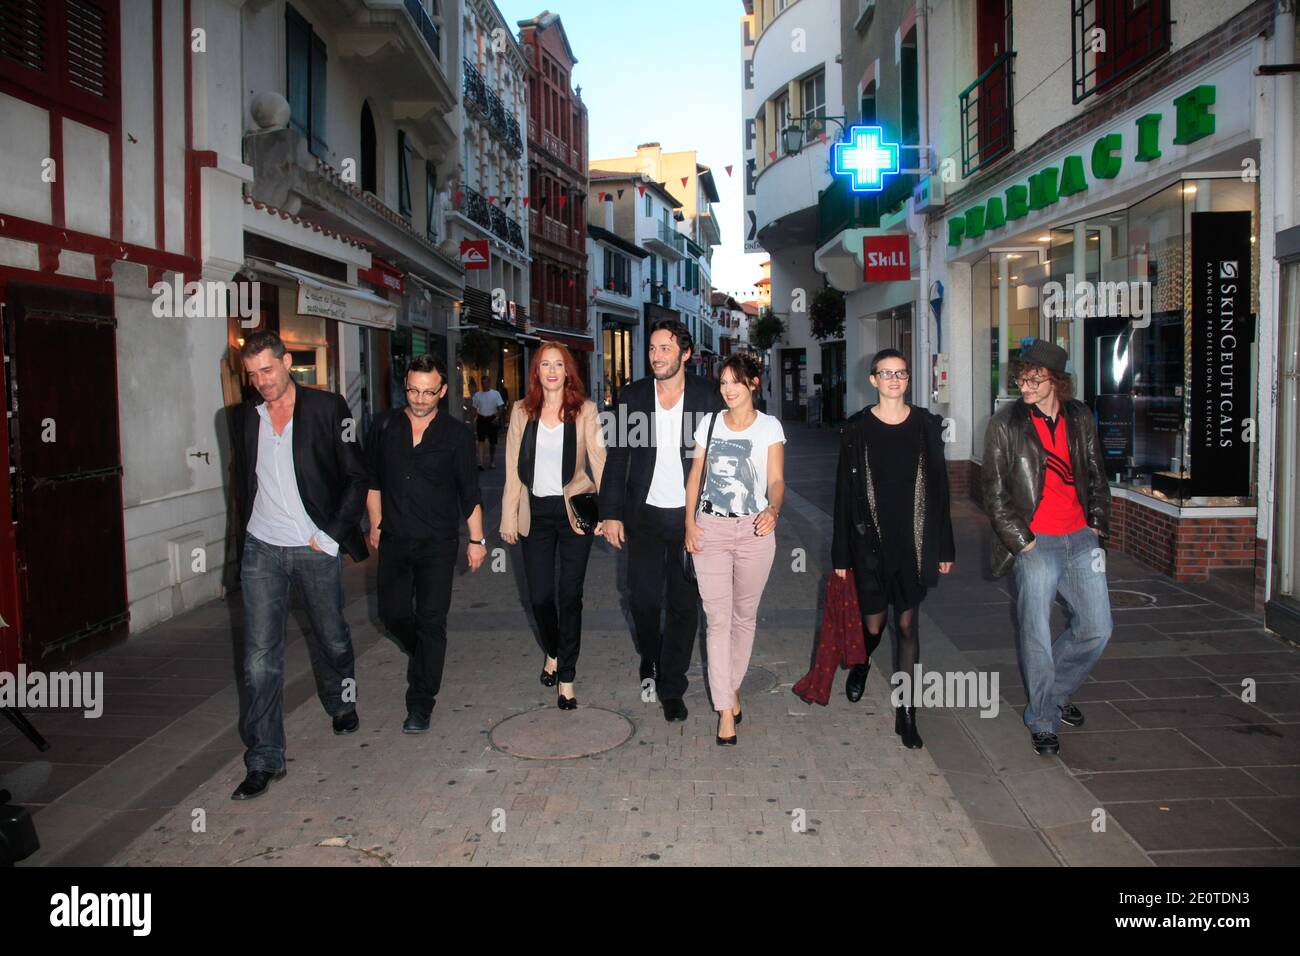 Jury's members Audrey Fleurot, Michael Cohen, Julien Courbey, Pauline Etienne, Cyril Mennegun, Elodie Navarre and Thierry Neuvic walking the streets during the opening of the 17th Young Directors International Film Festival in Saint-Jean-de-Luz, France on October 09, 2012. Photo by Jerome Domine/ABACAPRESS.COM Stock Photo